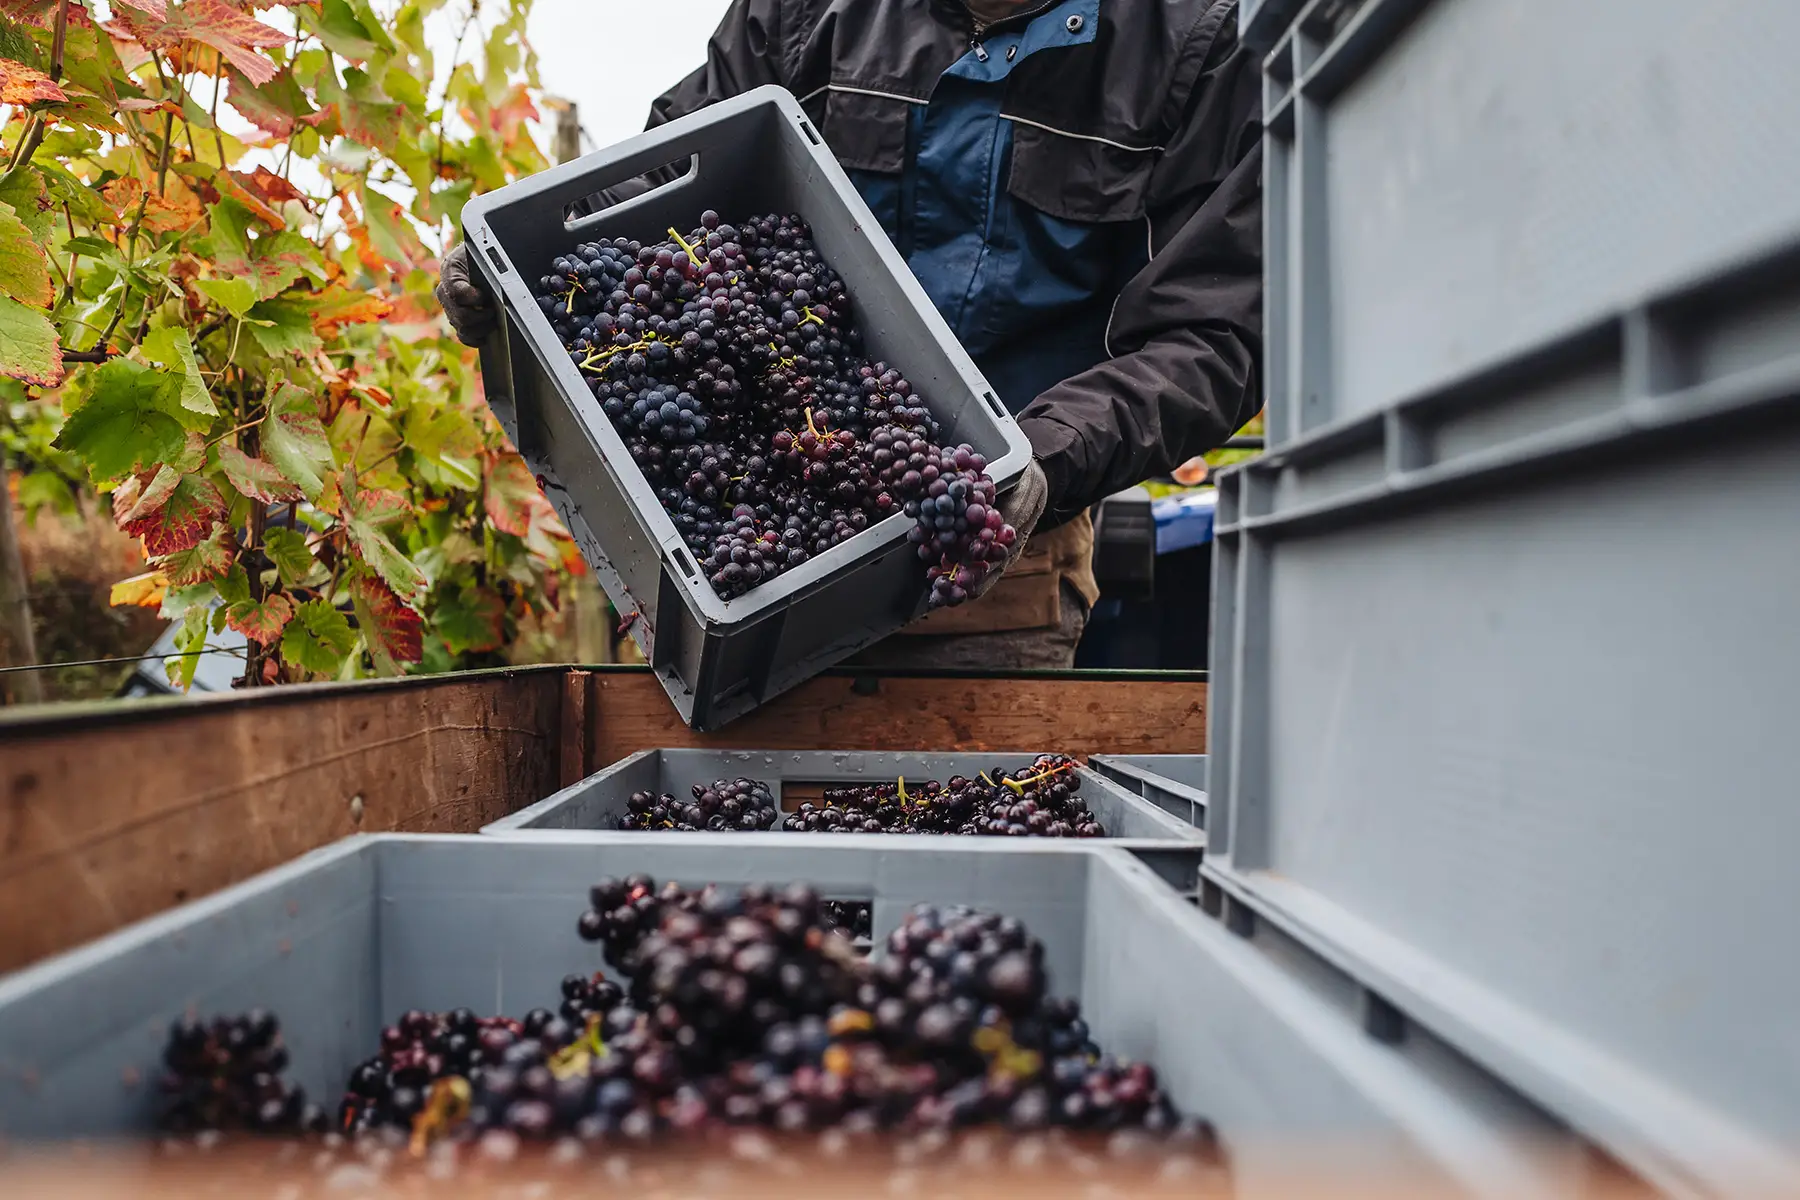 Harvesting pinot noir grapes in Luxembourg